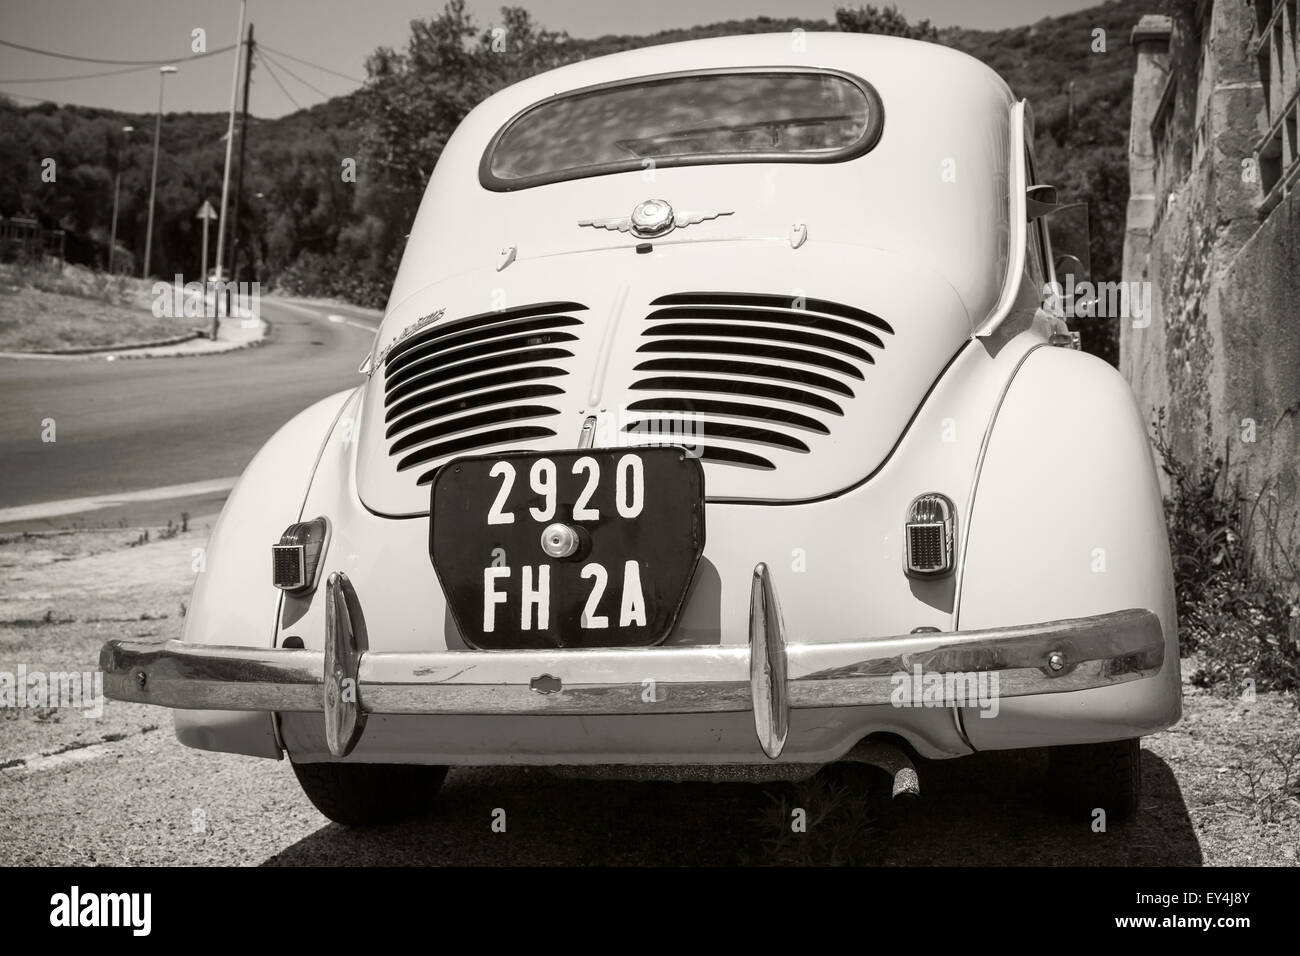 Ajaccio, France - July 6, 2015: White Renault 4CV old-timer economy car stands parked on a roadside in French town, close-up rea Stock Photo